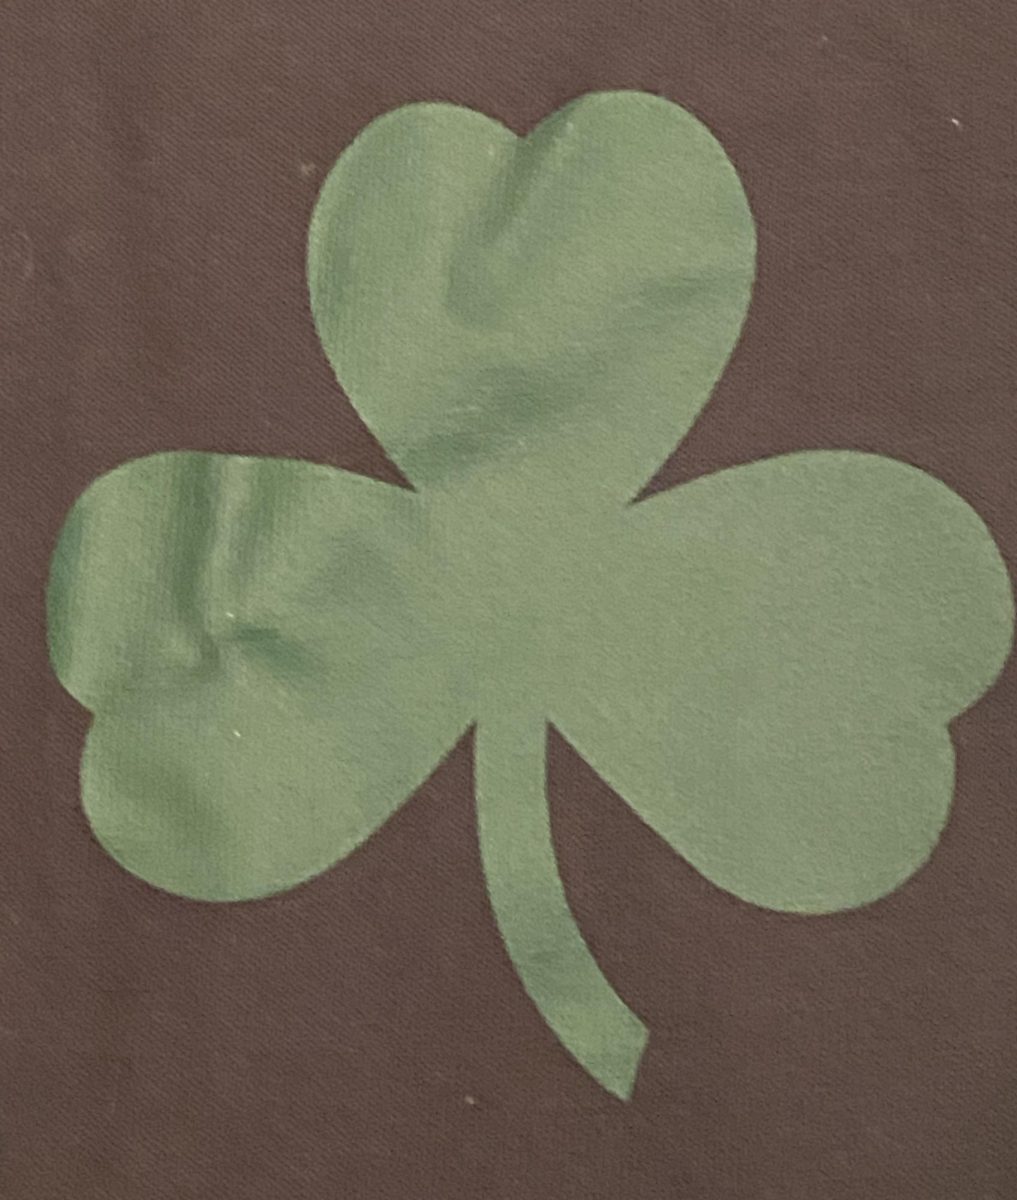 A+Green+shamrock+which+is+symbolic+of+the+Irish+and+St.+Patricks+Day